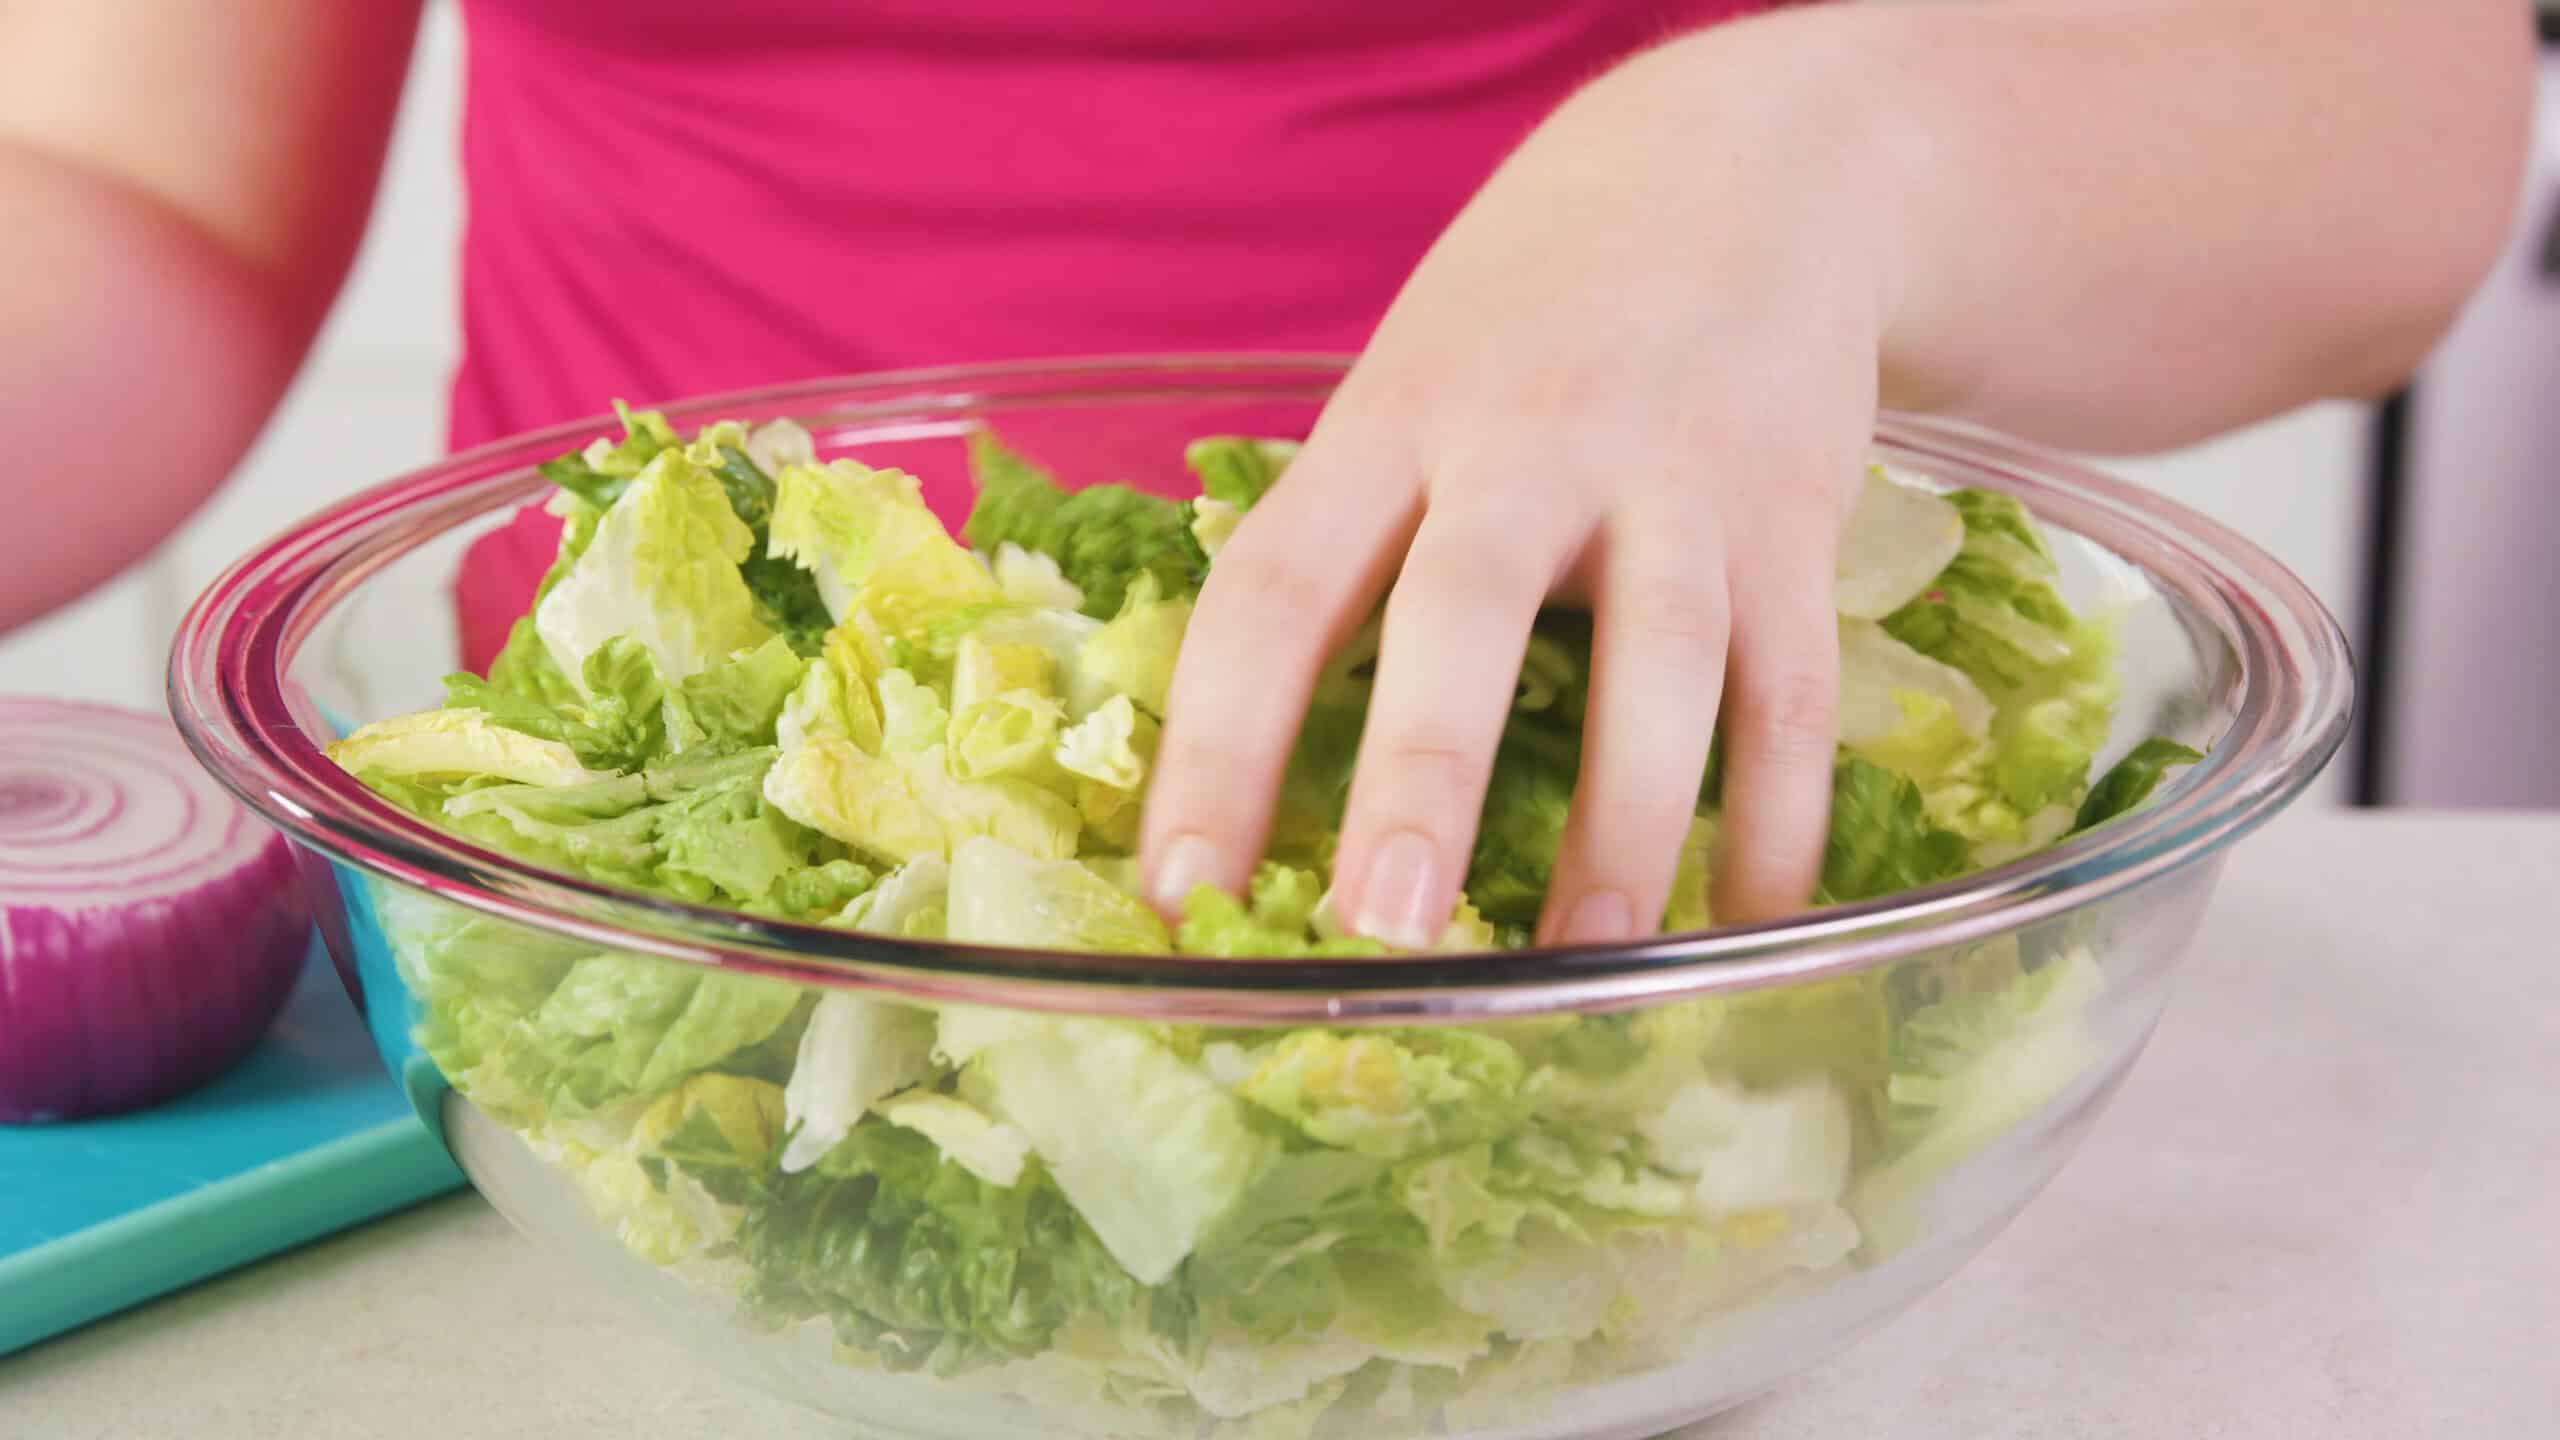 Angled view of a large clear glass mixing bowl filled with chopped green Romaine lettuce leaves.